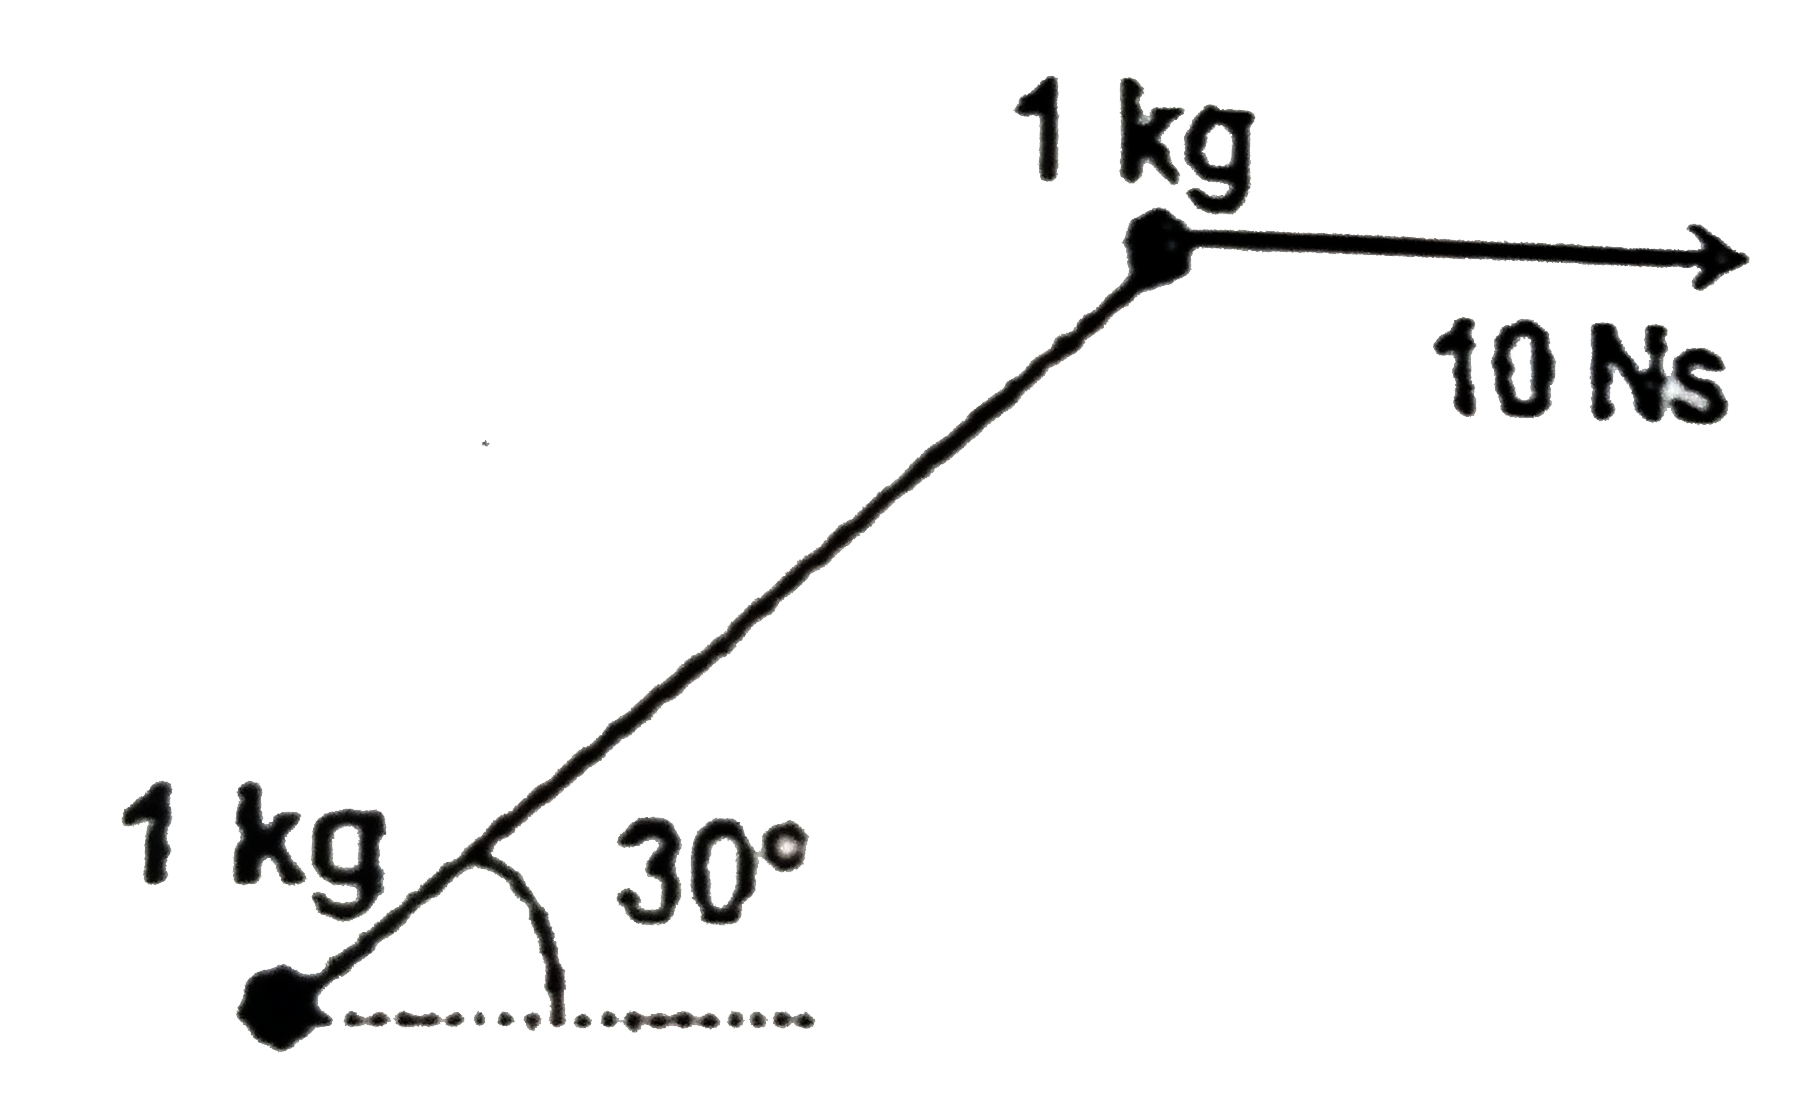 Two balls of masses 1 kg each are connected by an inextensible massless sting. The system is resting on a smooth horizontal surface. An impulse of 10Ns is applied to one of the balls at an angle 30^(@) with the line joining two balls in horizontal direction as shown in the figure.Assuming that the string remains taut after the impulse, the magnitude of impulse of tension on either ball is: